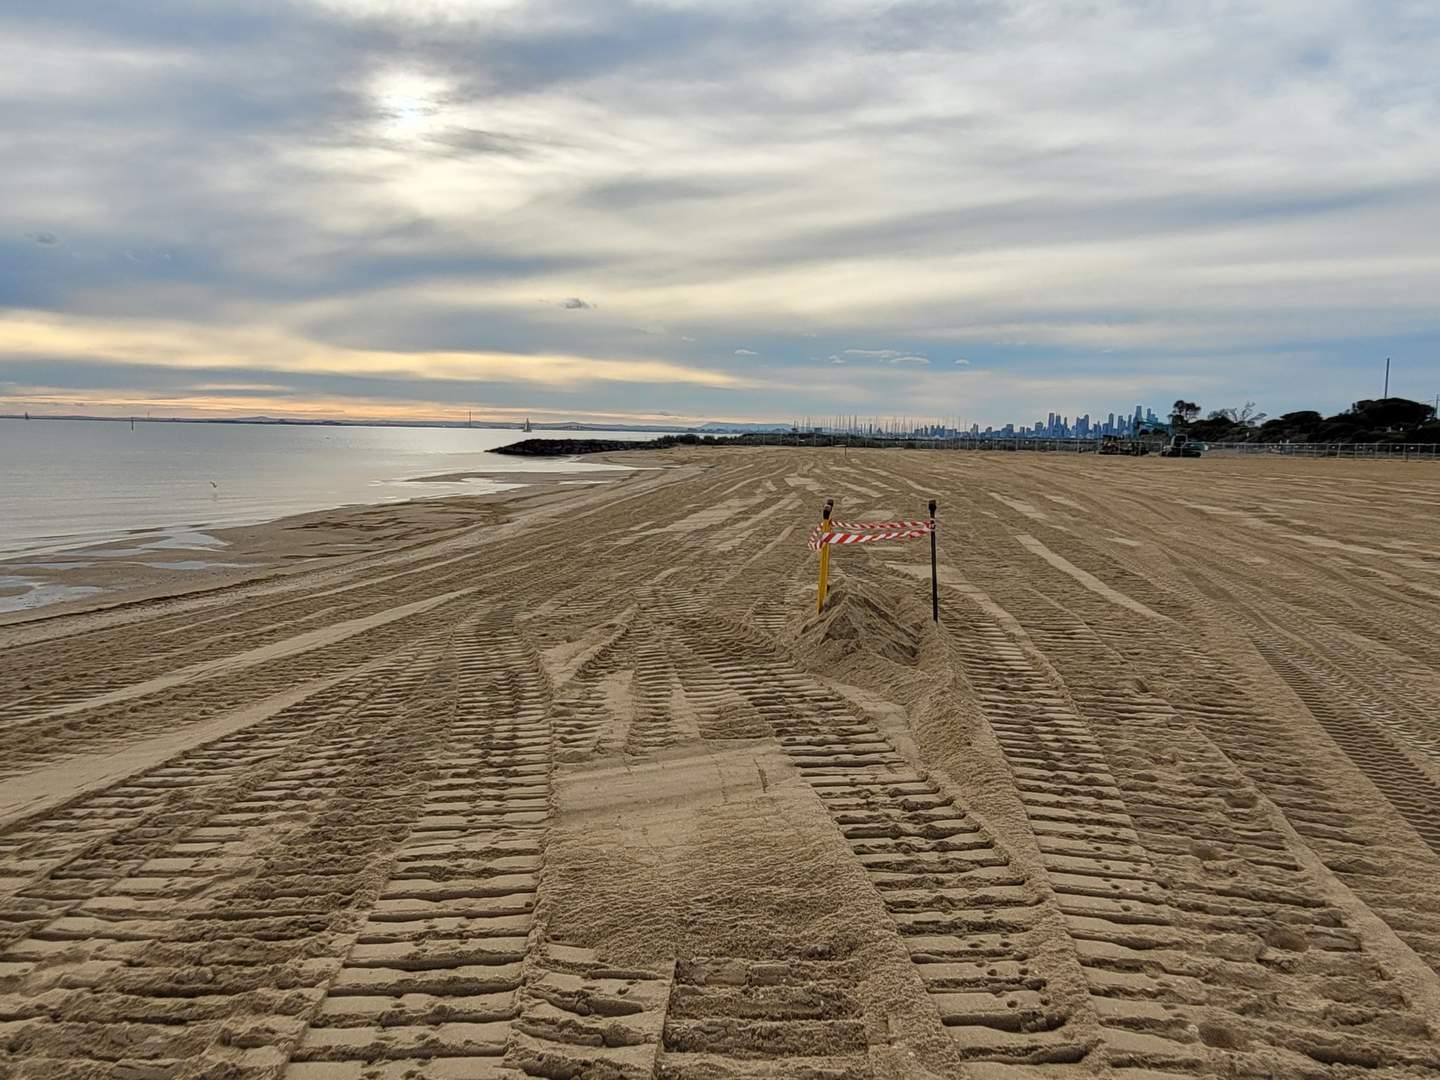 Lots of sand at Dendy Street Beach looking towards the city.